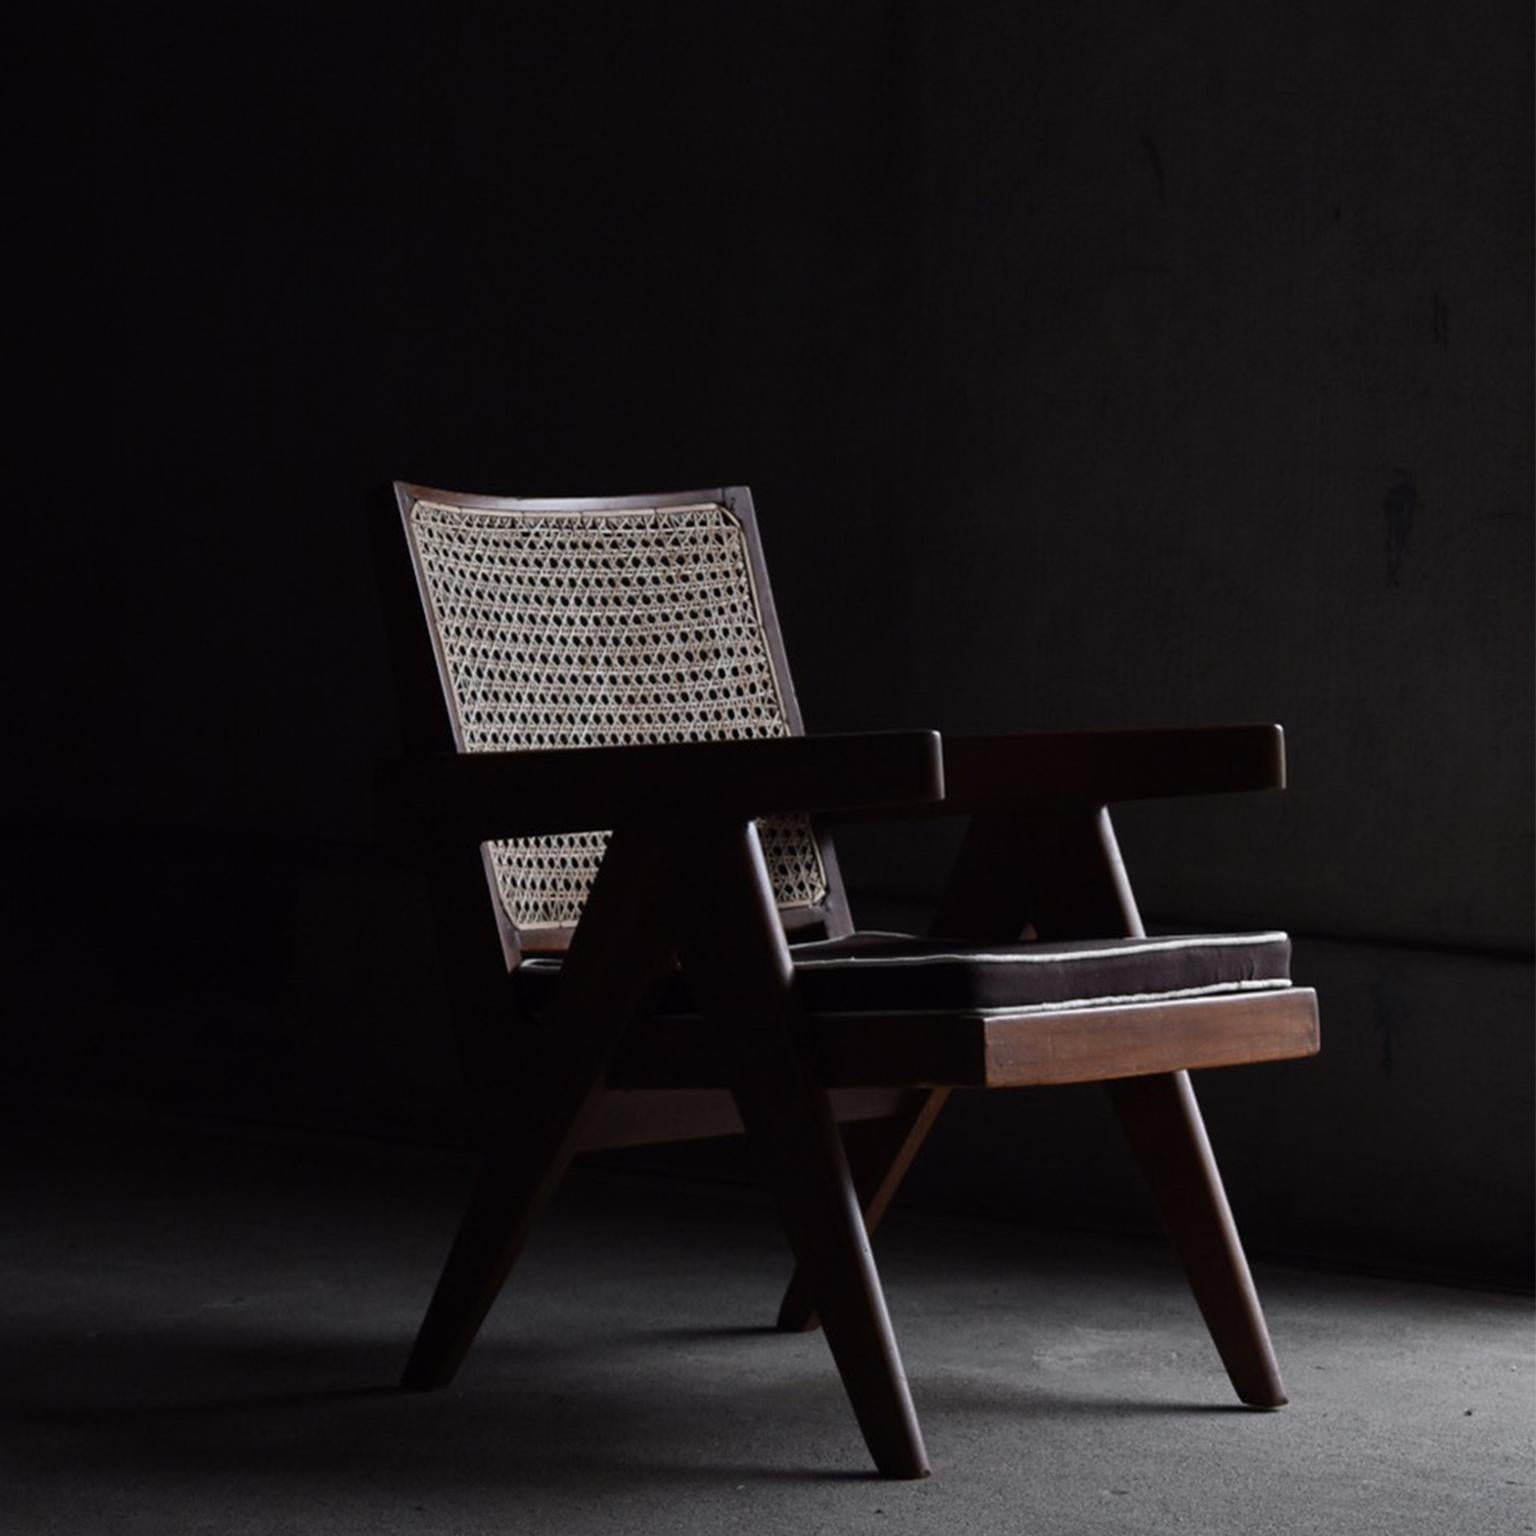 Easy chair designed by Pierre Jeanneret for various buildings at Chandigarh in India.